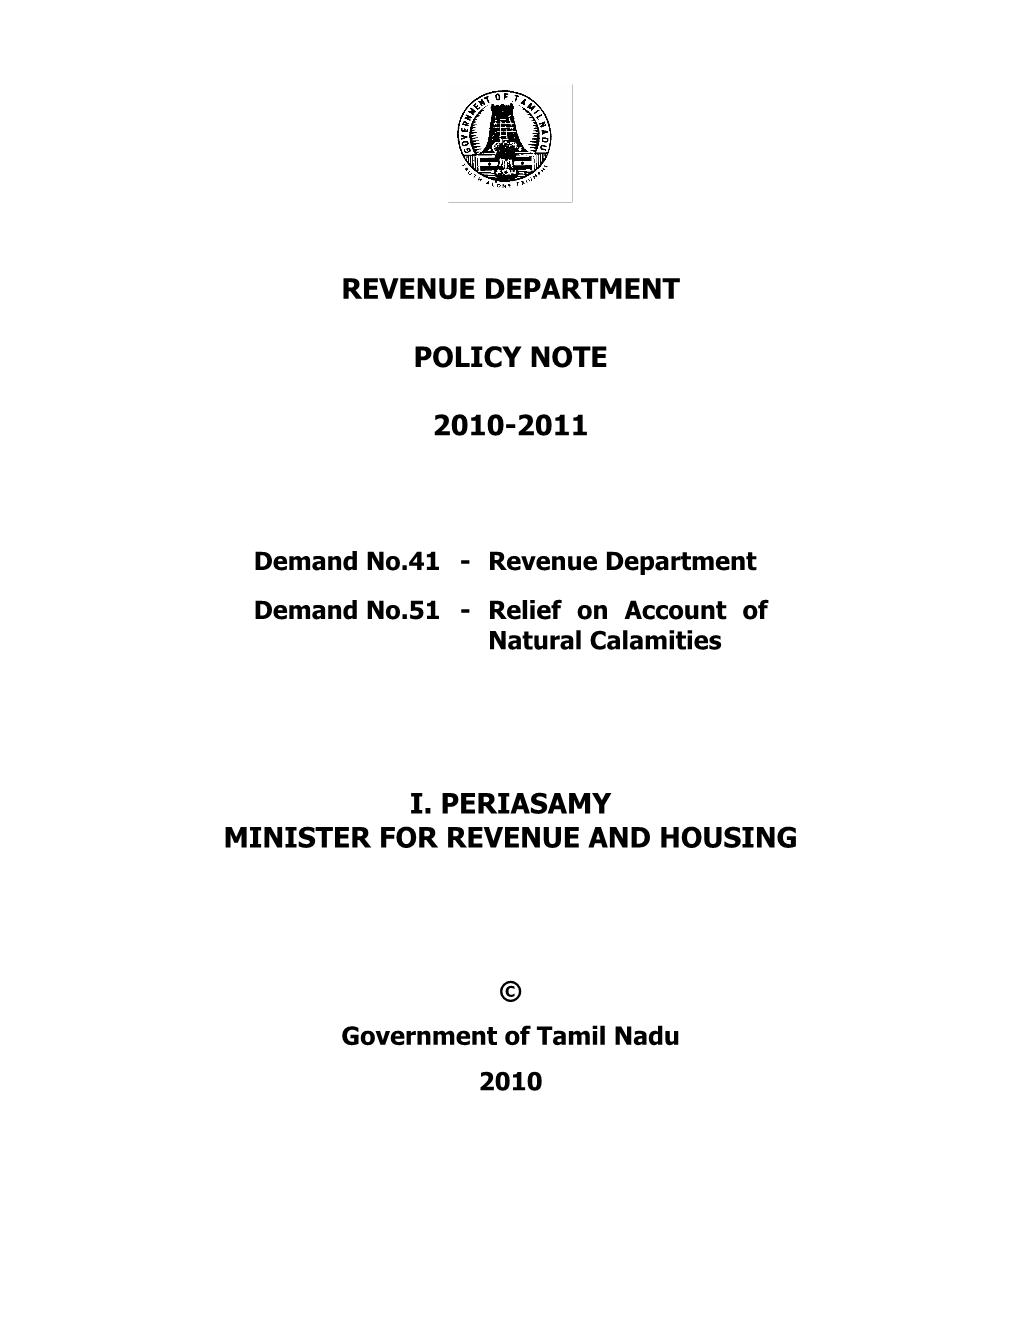 Revenue Department Policy Note 2010-2011 I. Periasamy